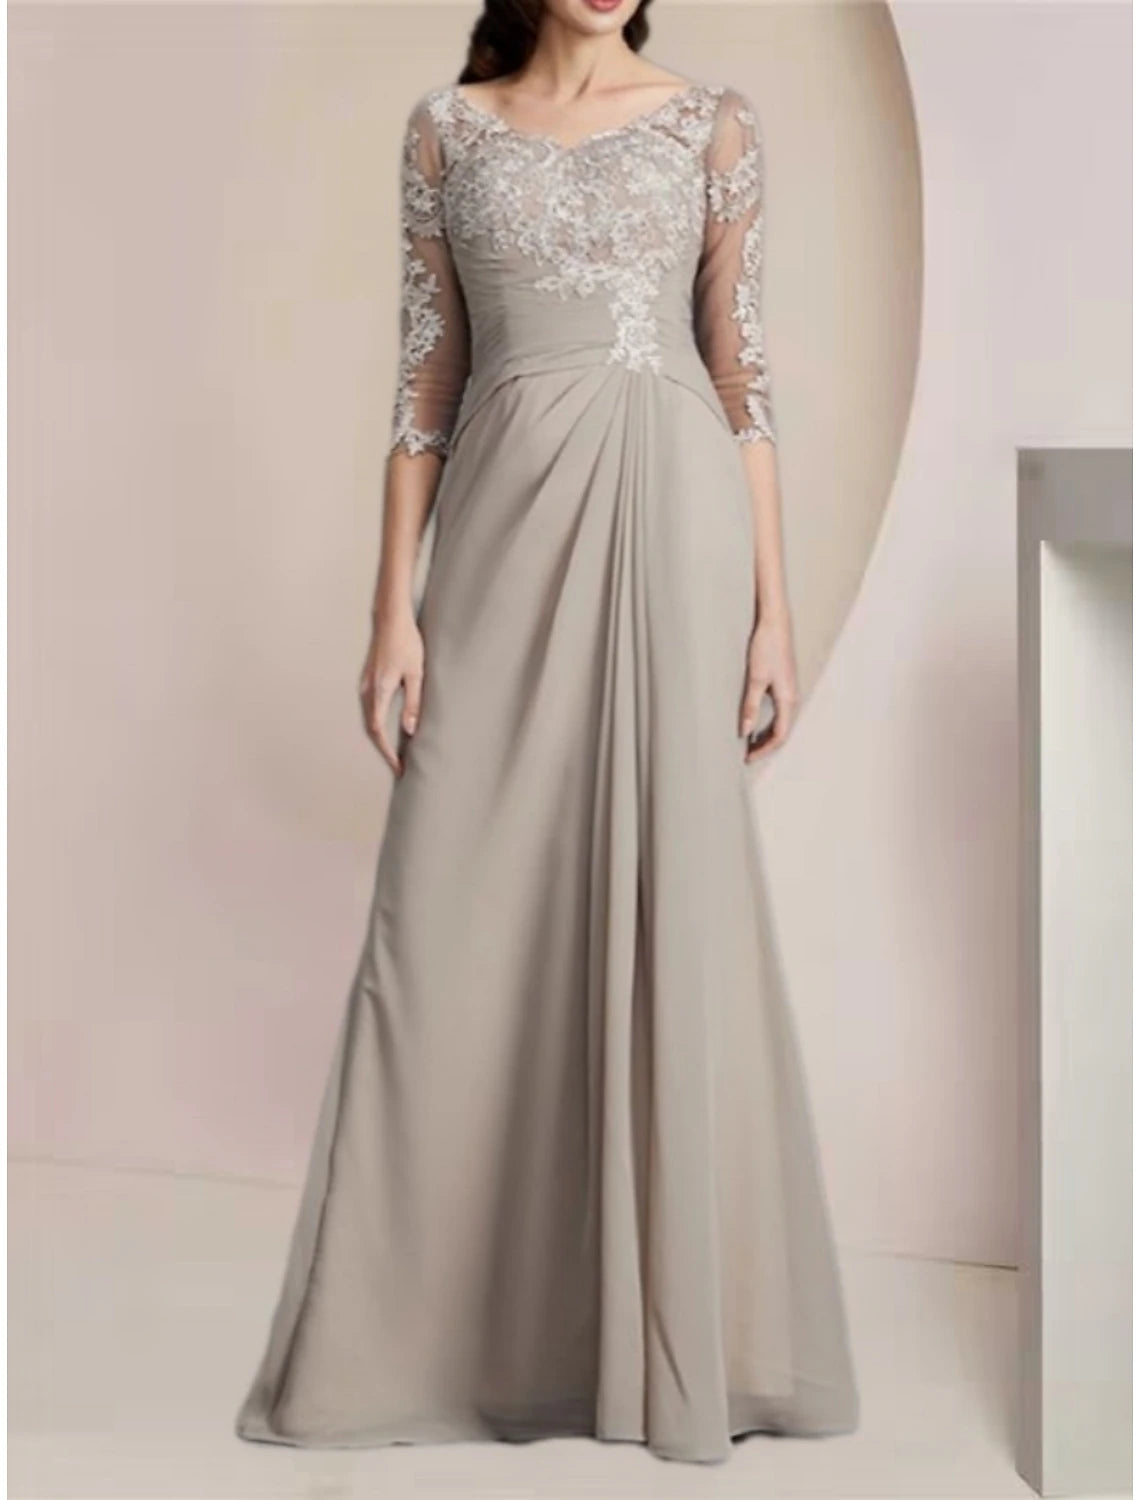 A-Line Mother of the Bride Dress Wedding Guest Elegant Scoop Neck Floor Length Chiffon Half Sleeve with Lace Ruching Solid Color